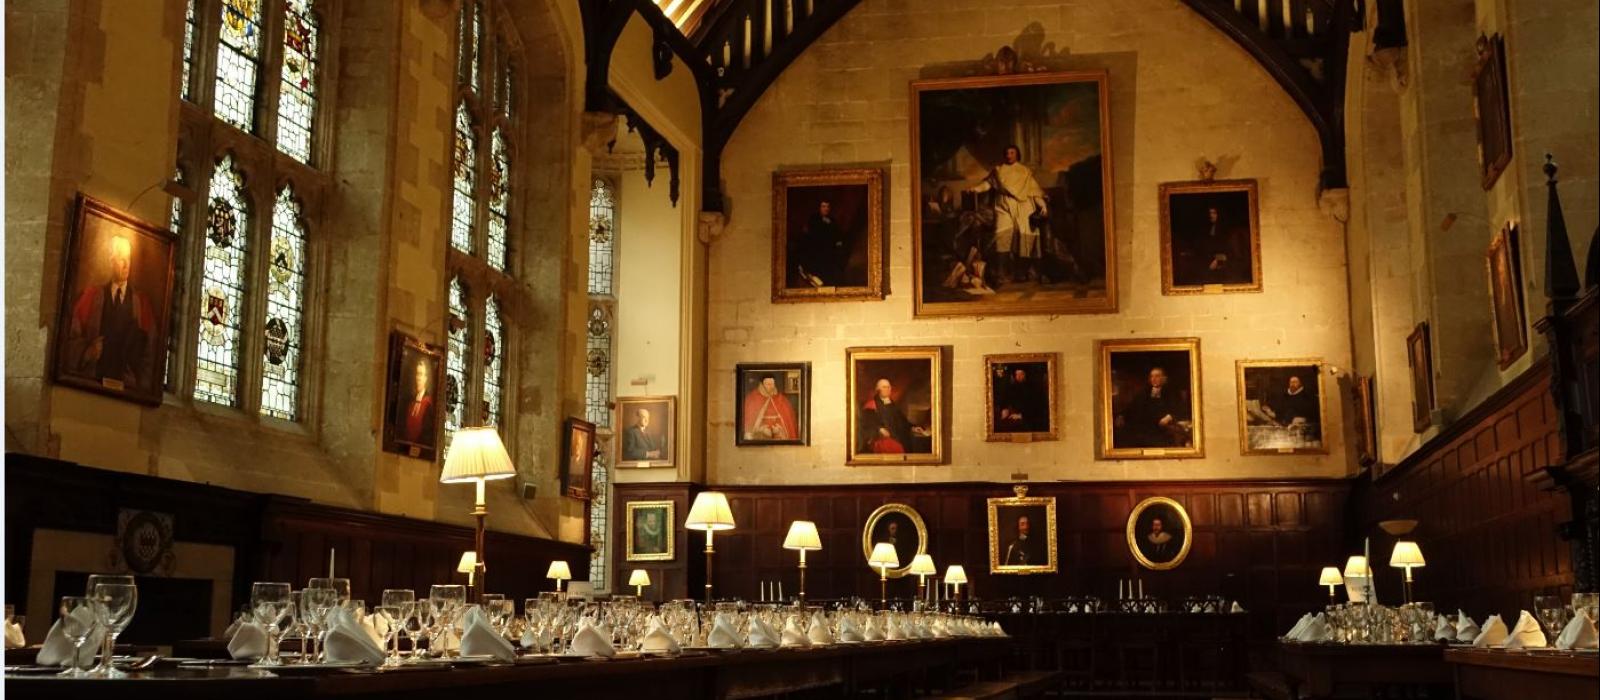 Dining Hall, Exeter College